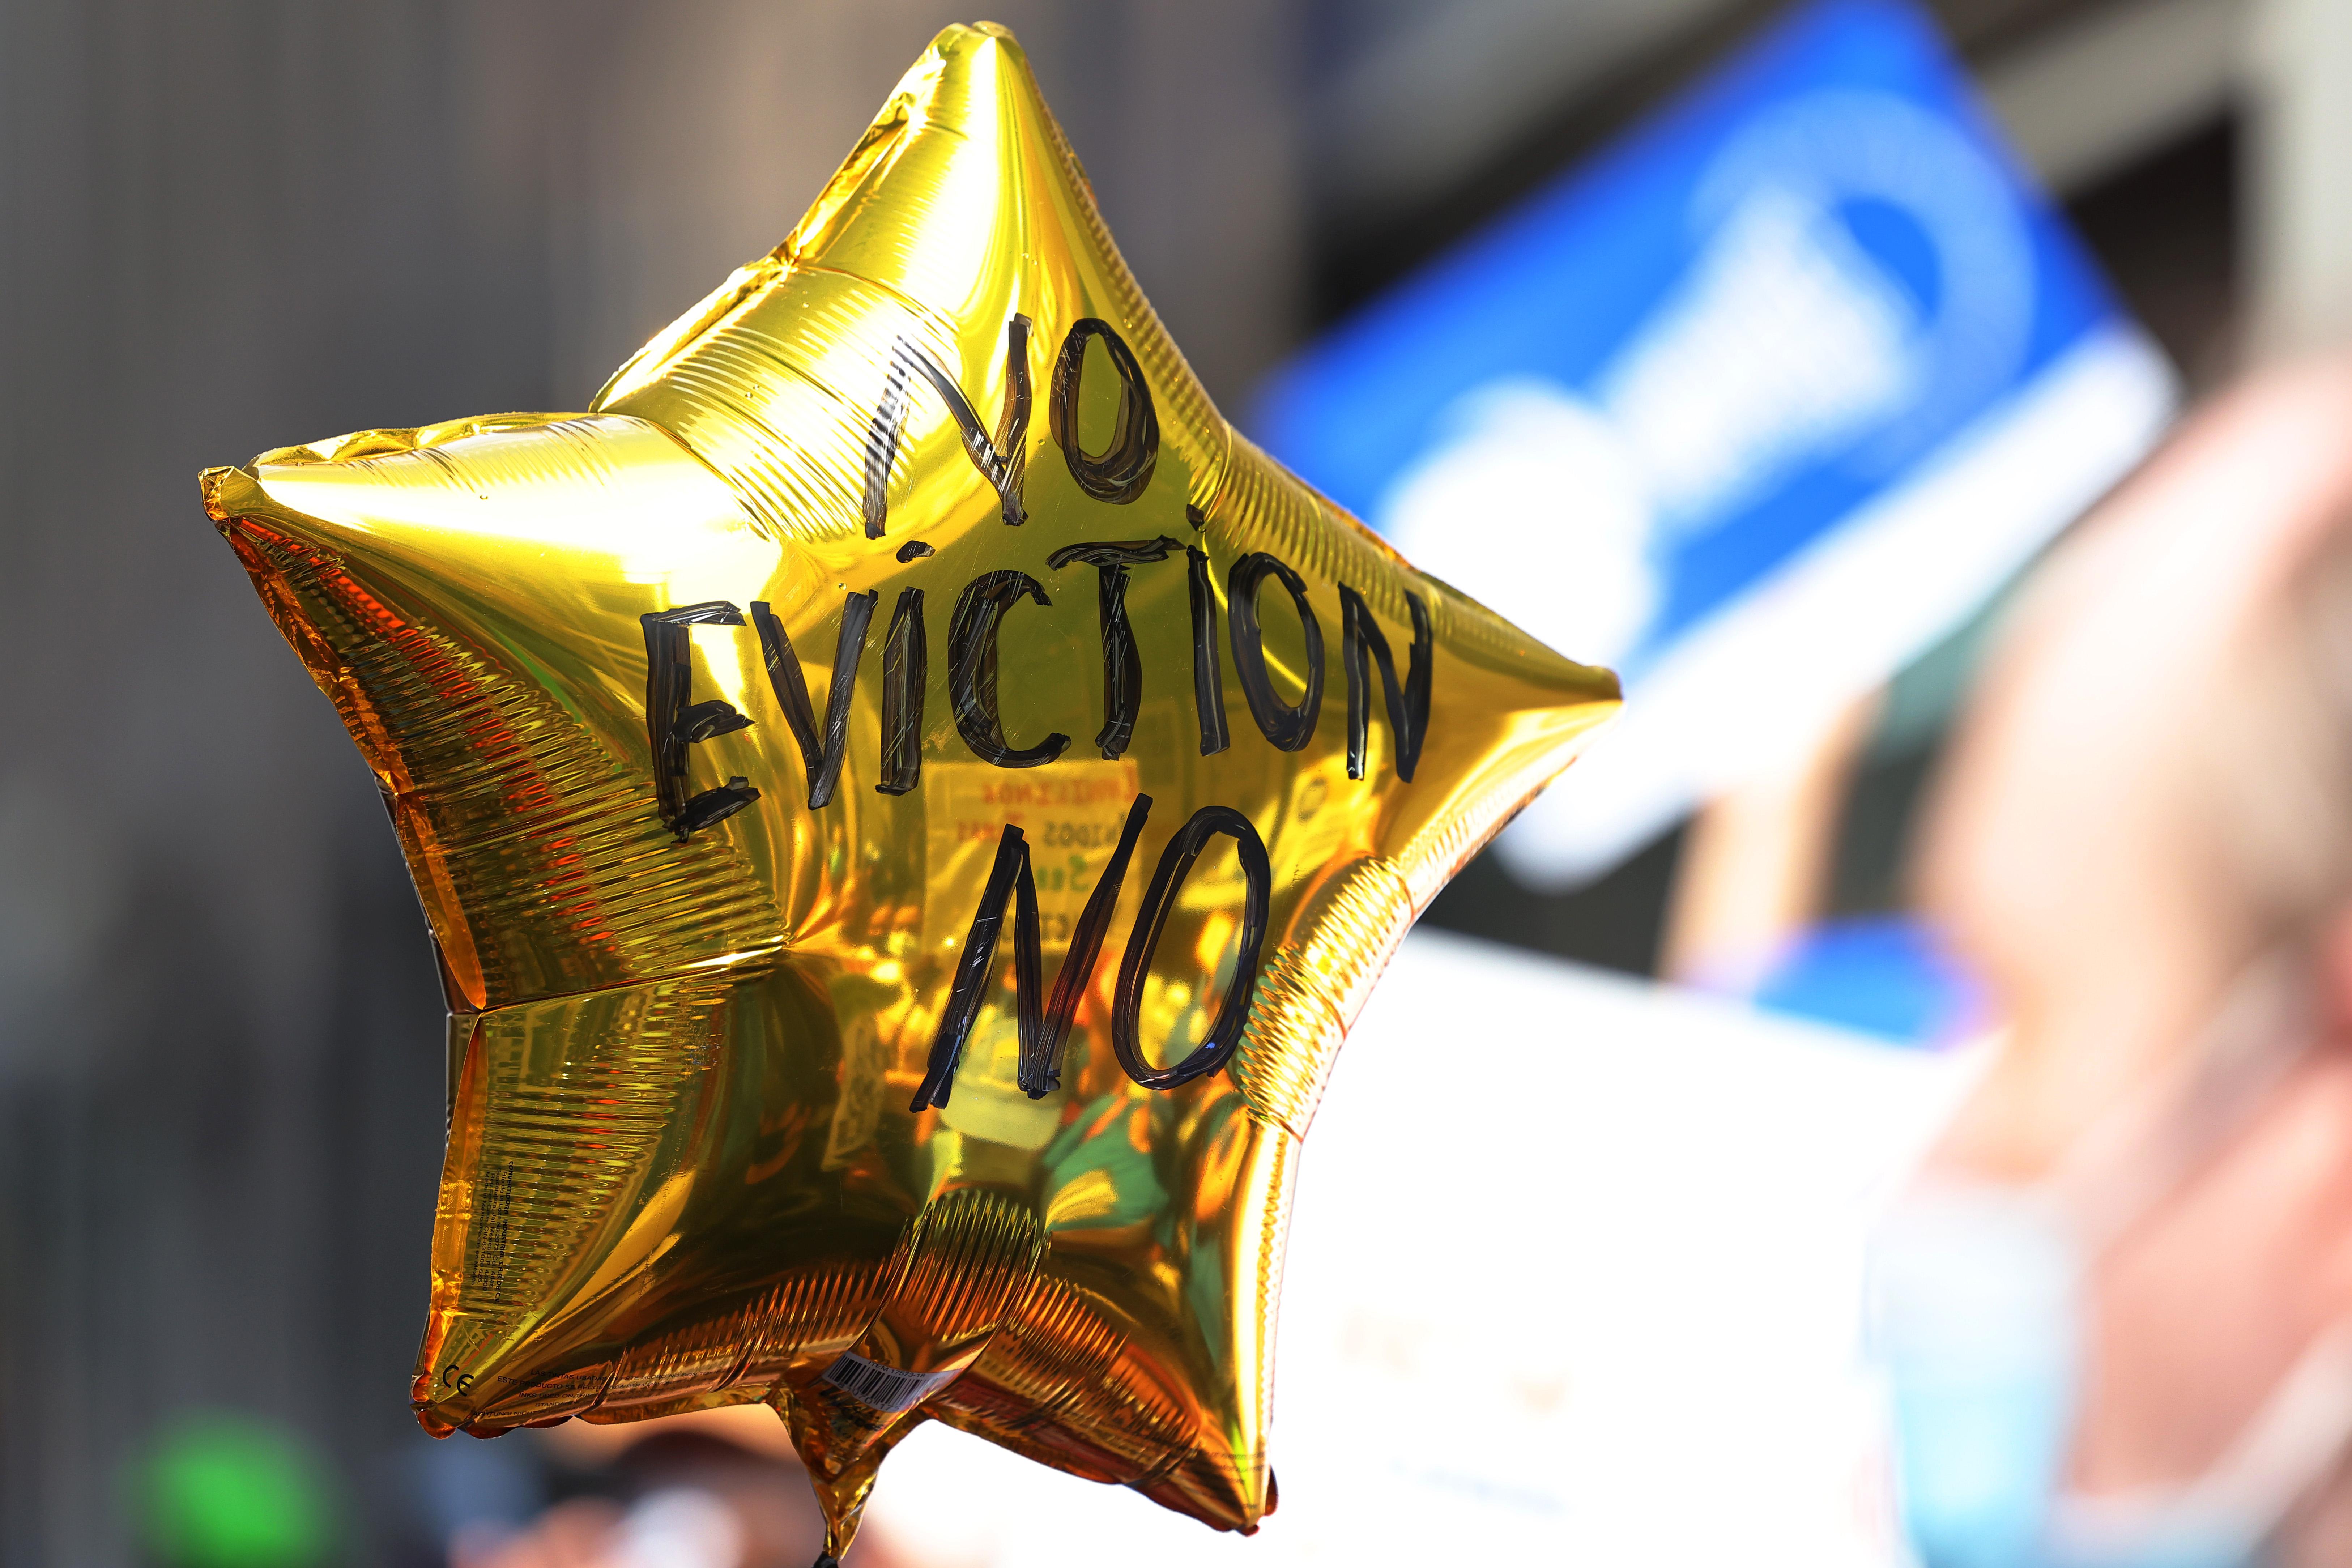 A balloon with the words "No Eviction No" is seen as people gather outside of a New York City Marshall's office calling for a stop to evictions on August 31, 2021 in New York City. Housing activists and community members gathered and marched towards the NYC office of Gov. Hochul calling on her, Assembly Speaker Carl Heastie, and Senate Majority Leader Andrea Stewart-Cousins to amend and extend the evictions moratorium, which expires tonight. Rent Stabilization Association, New York's largest landlord group, has threatened to sue the state legislature if lawmakers extend the pandemic-era eviction moratorium. On August 12th, the U.S. Supreme Court ruled against parts of New York's eviction moratorium that allows renters to submit a hardship declaration form stating a loss of income due to the coronavirus (COVID-19) pandemic or that moving would harm their health. (Photo by Michael M. Santiago/Getty Images)